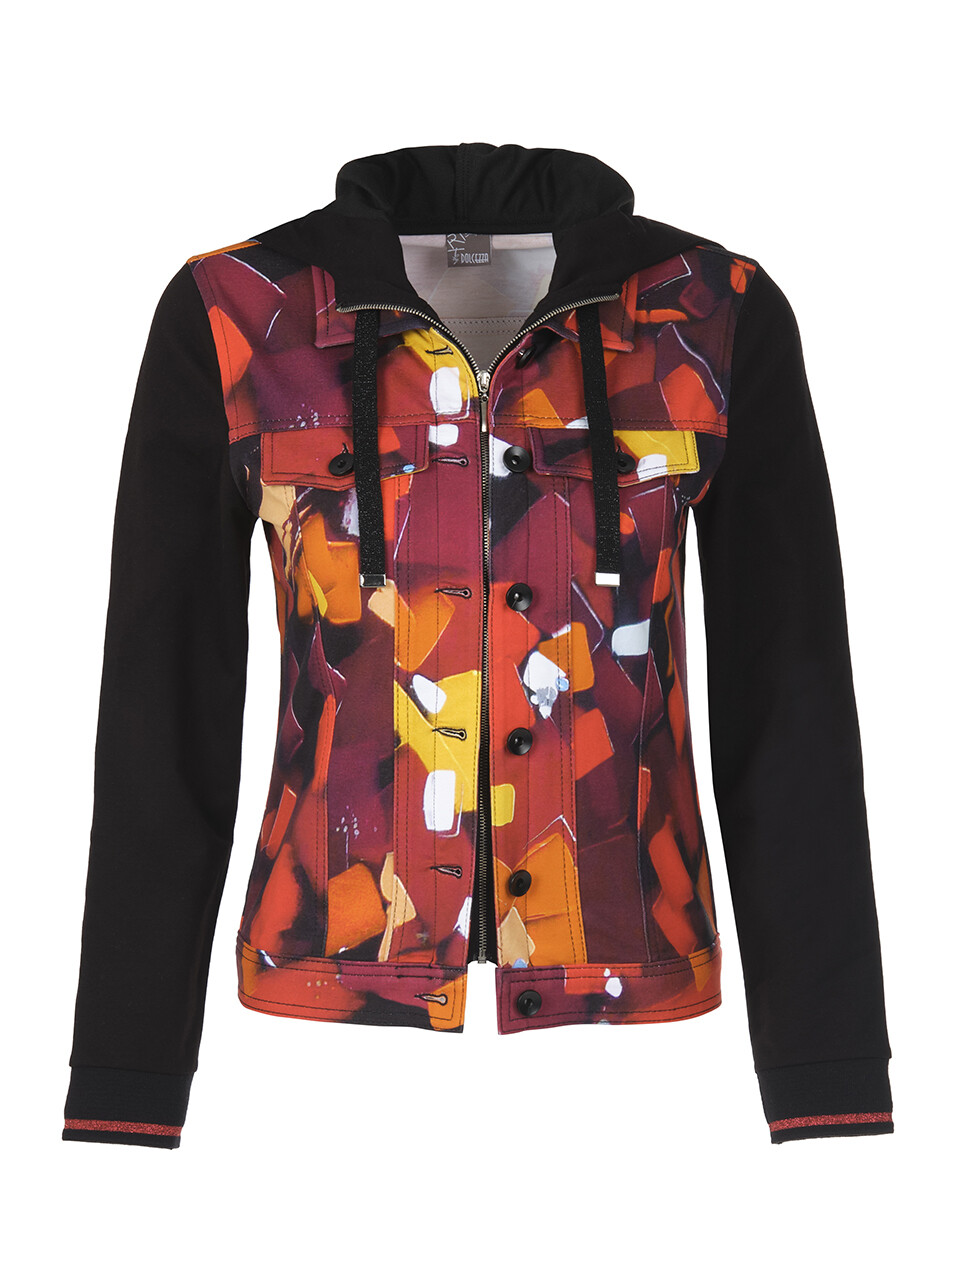 Simply Art Dolcezza: Insolite Abstract Art Soft Denim Hoodie Jacket